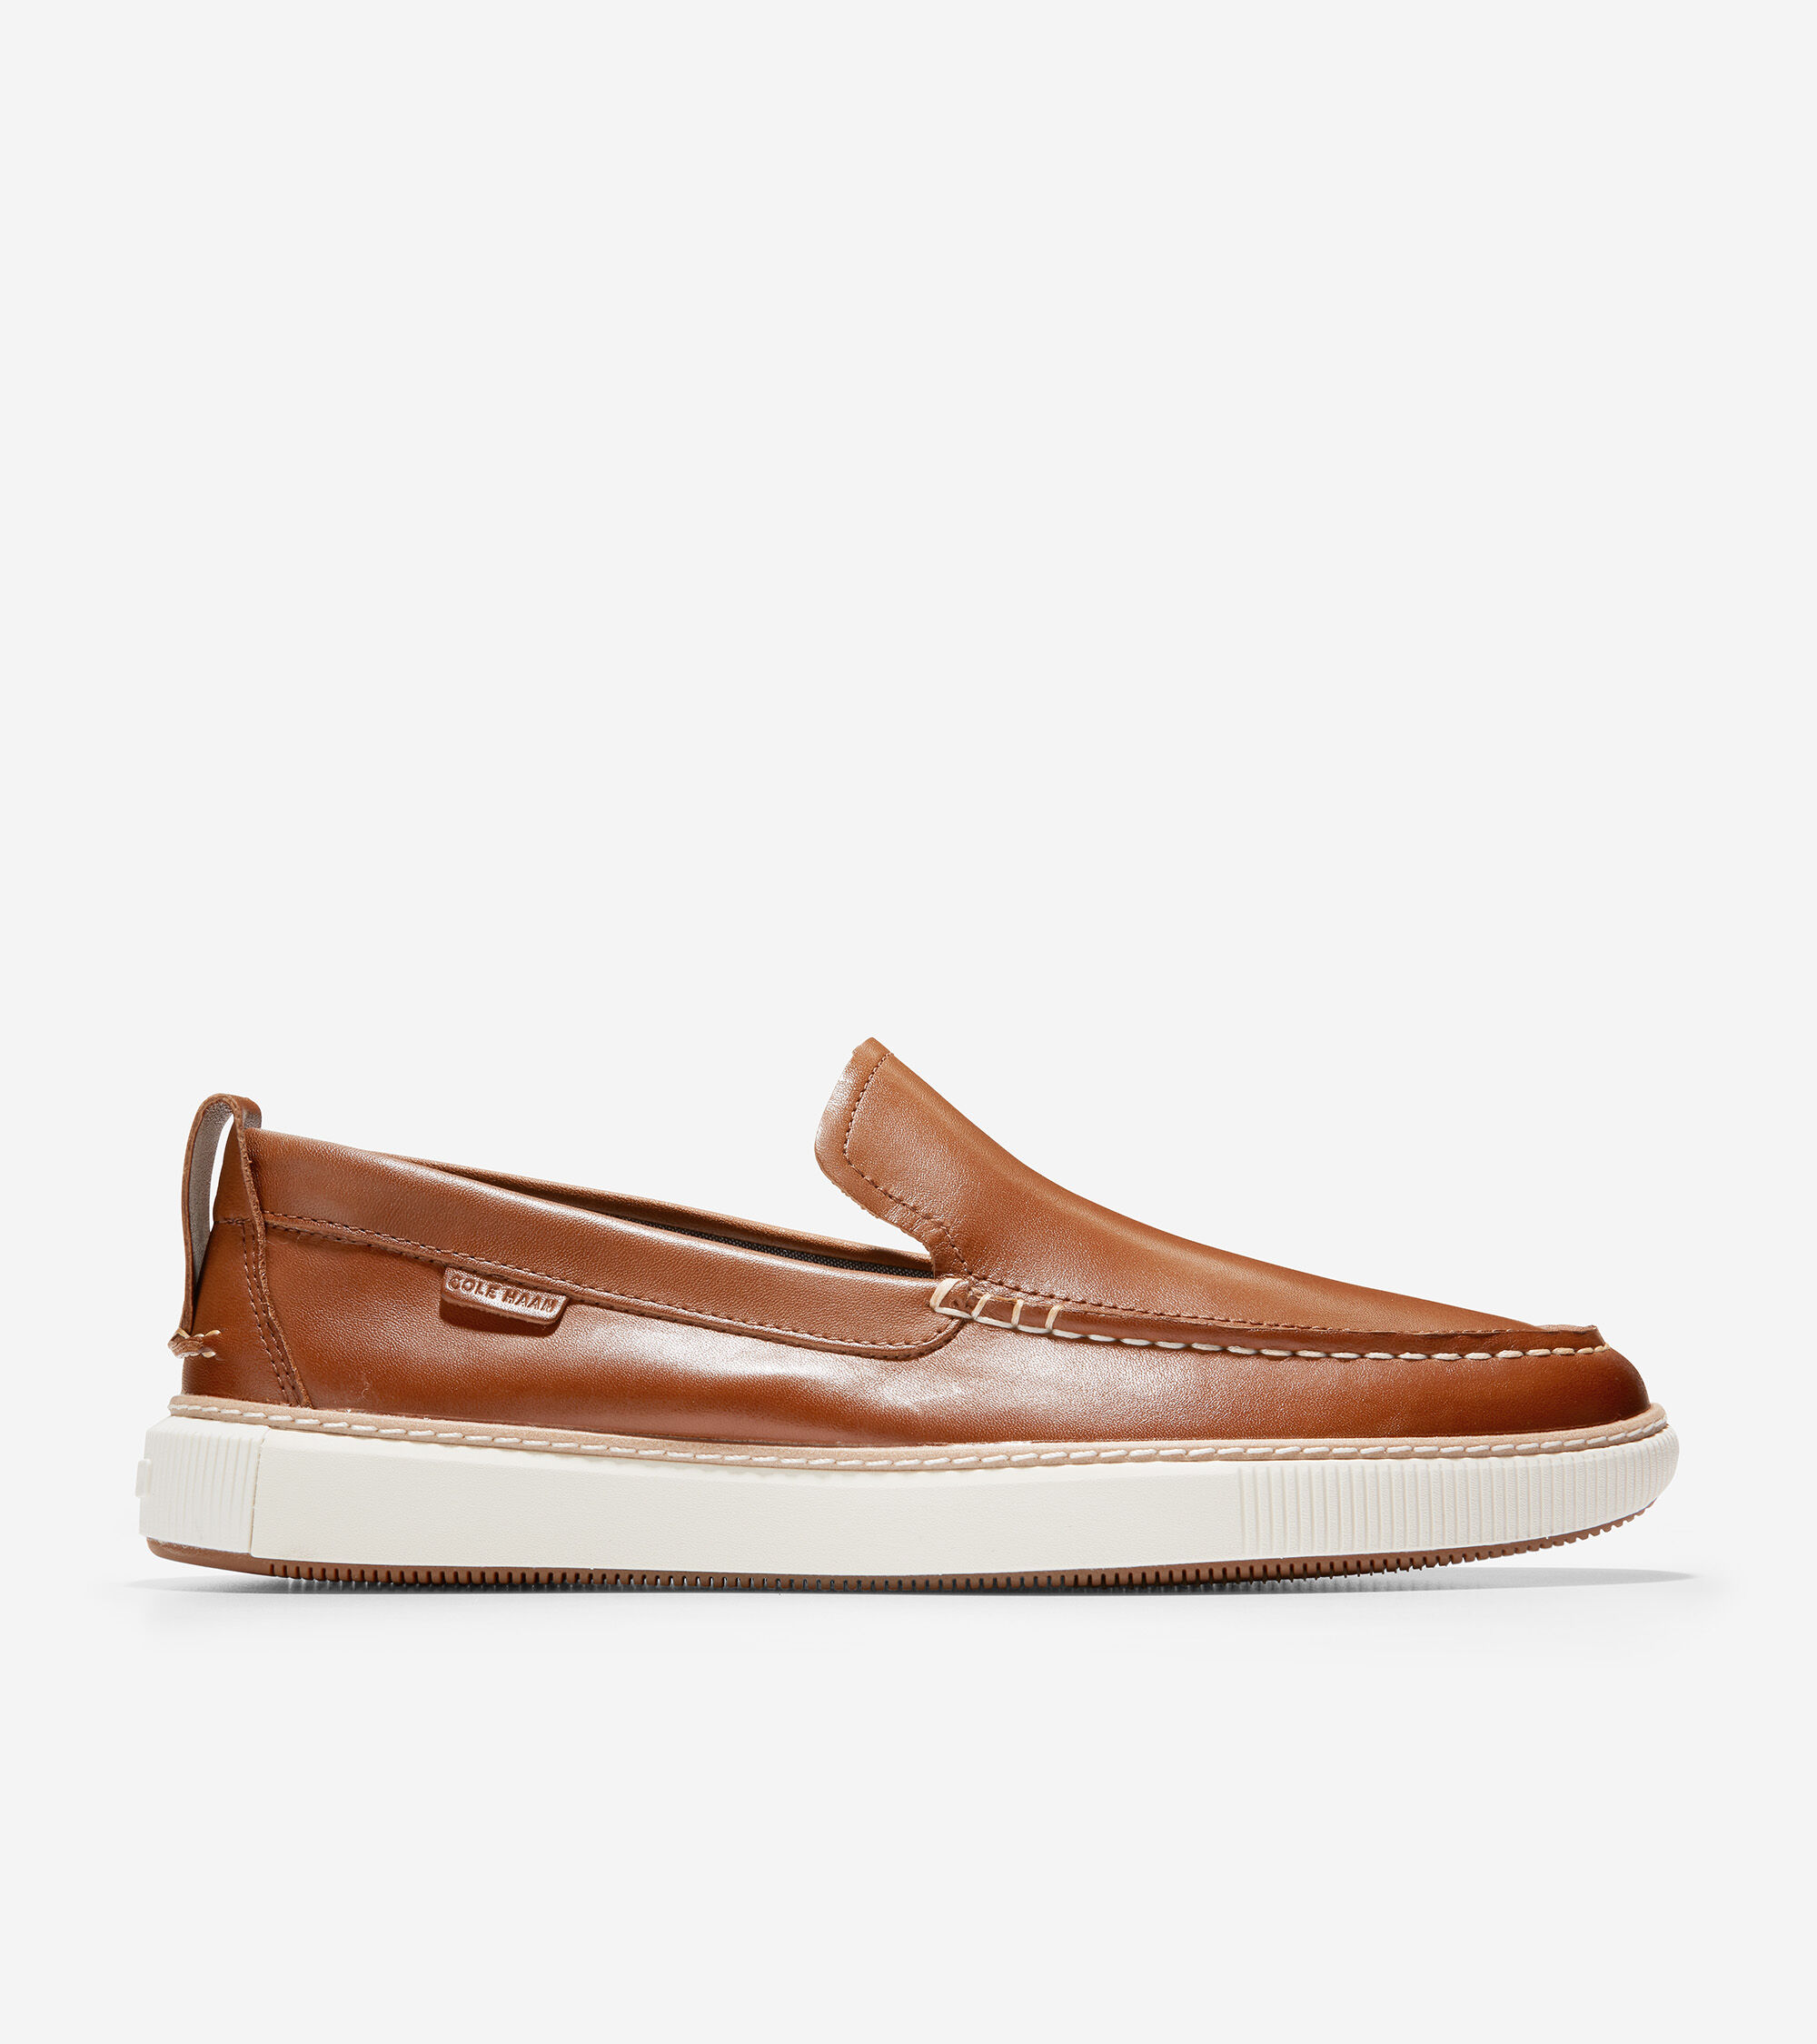 wide width driving moccasins